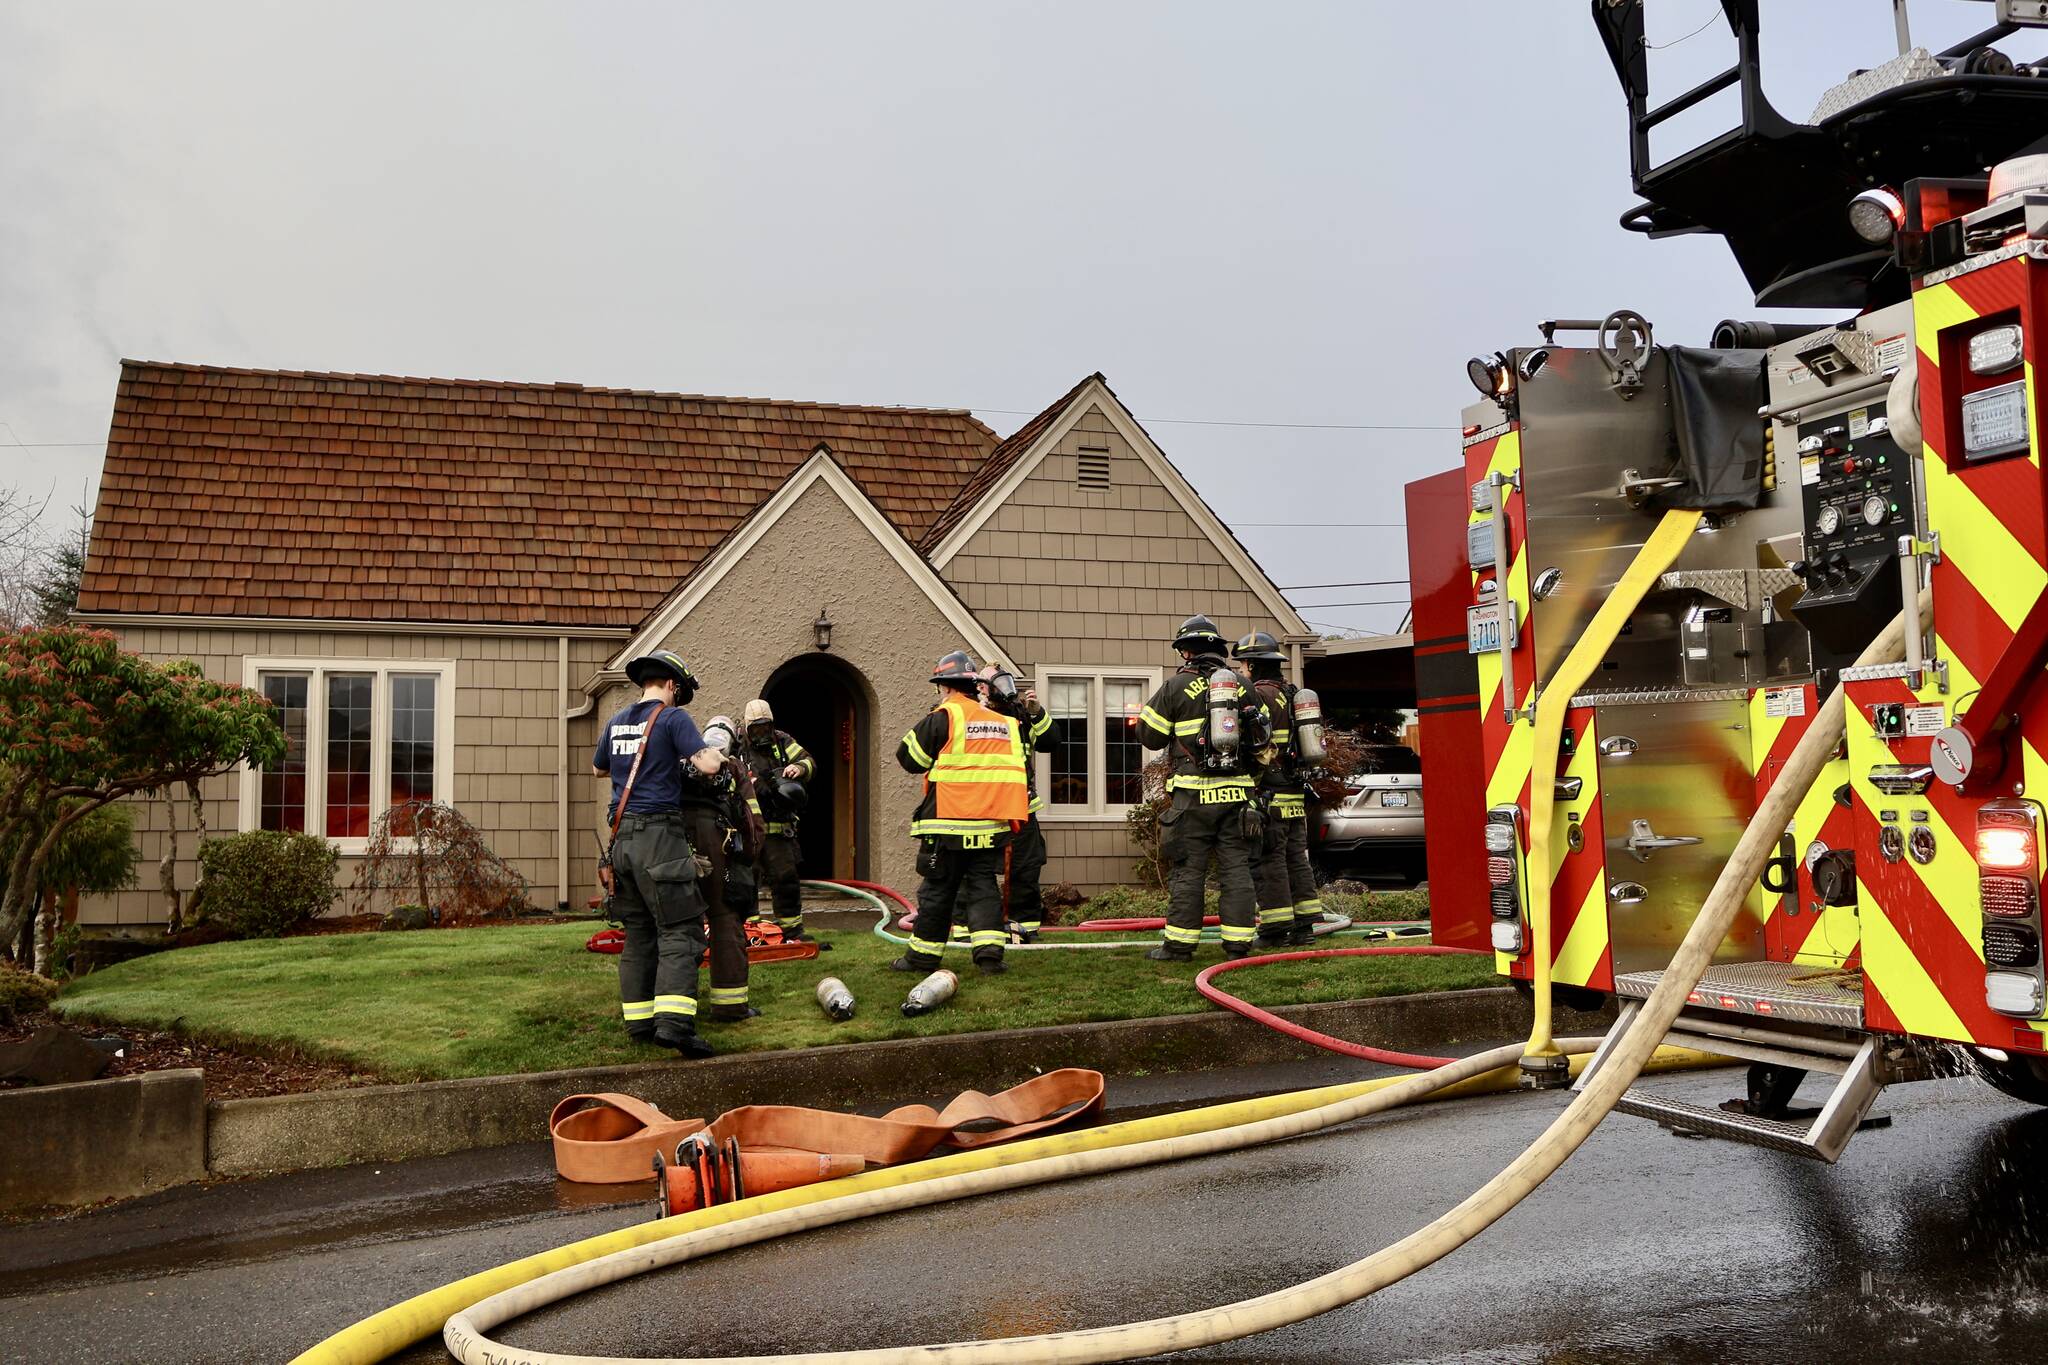 Aberdeen house fire quickly extinguished by joint response